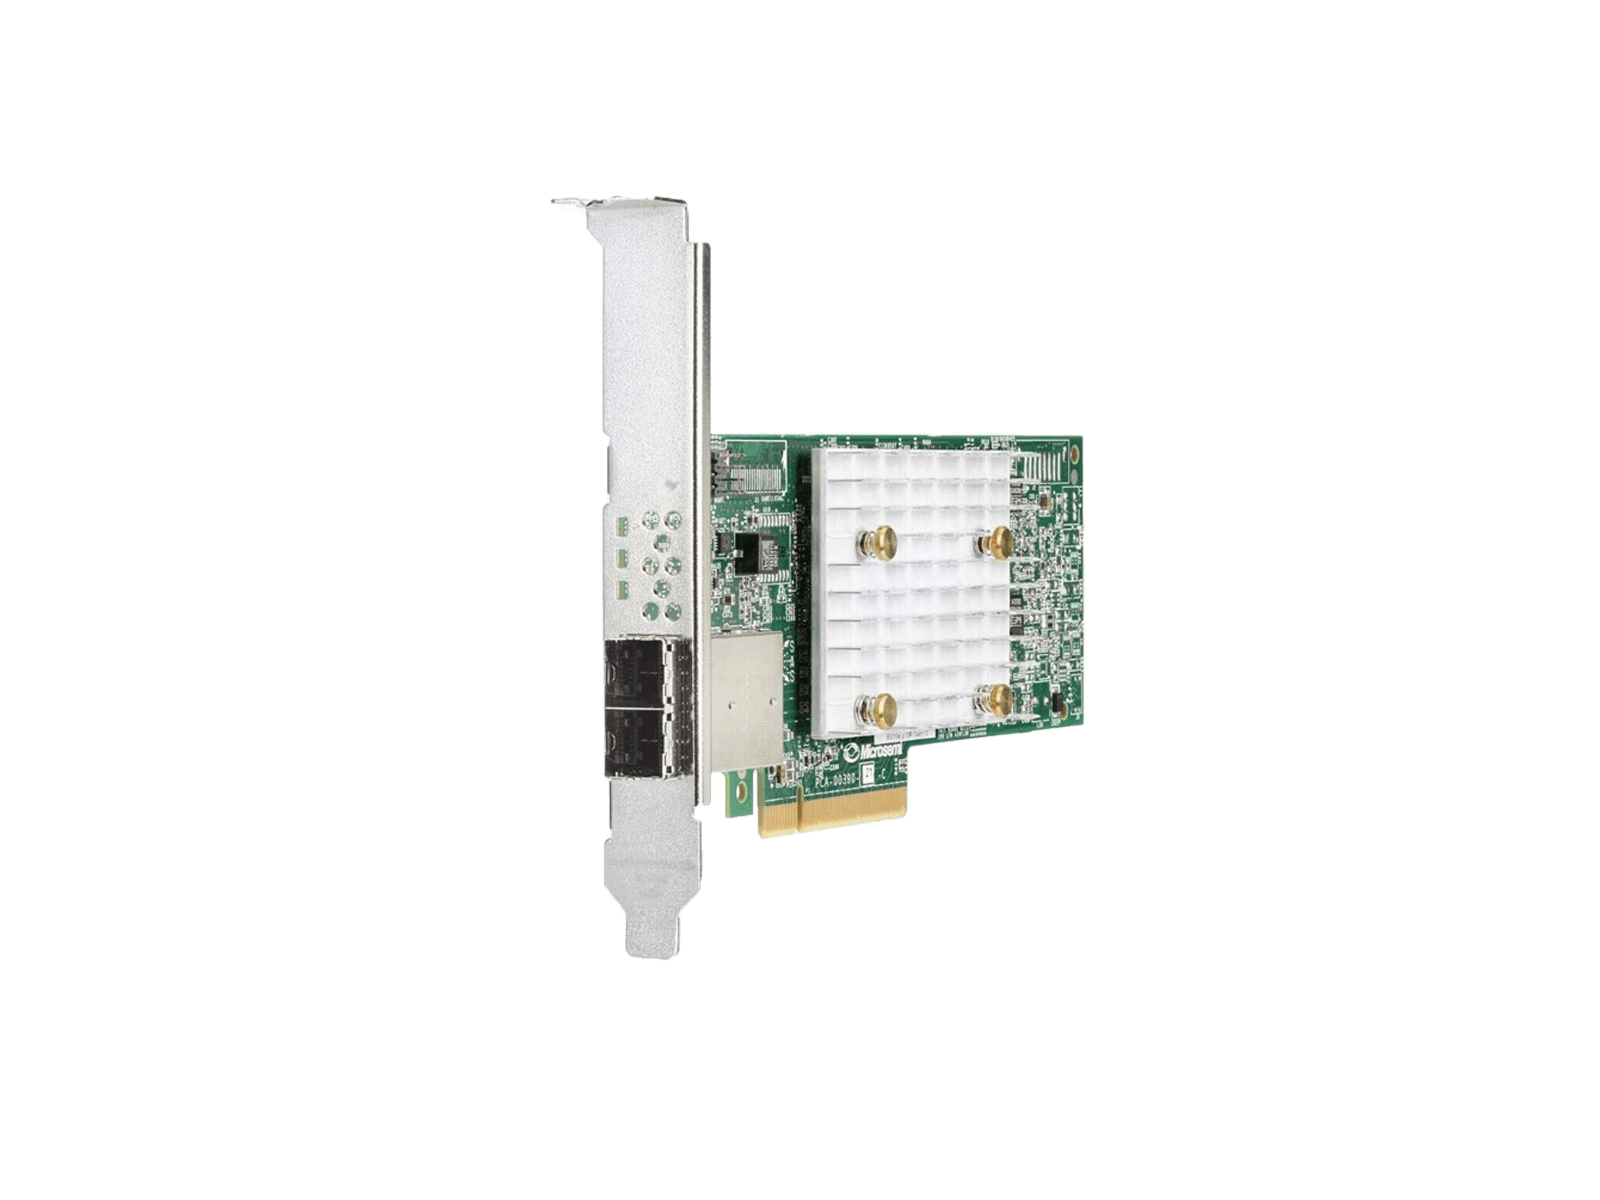 HPE 804398-B21 Smart Array E208e-p SR Gen10/Plus/V2 RAID/HBA External Adapter PCIe New Pull.